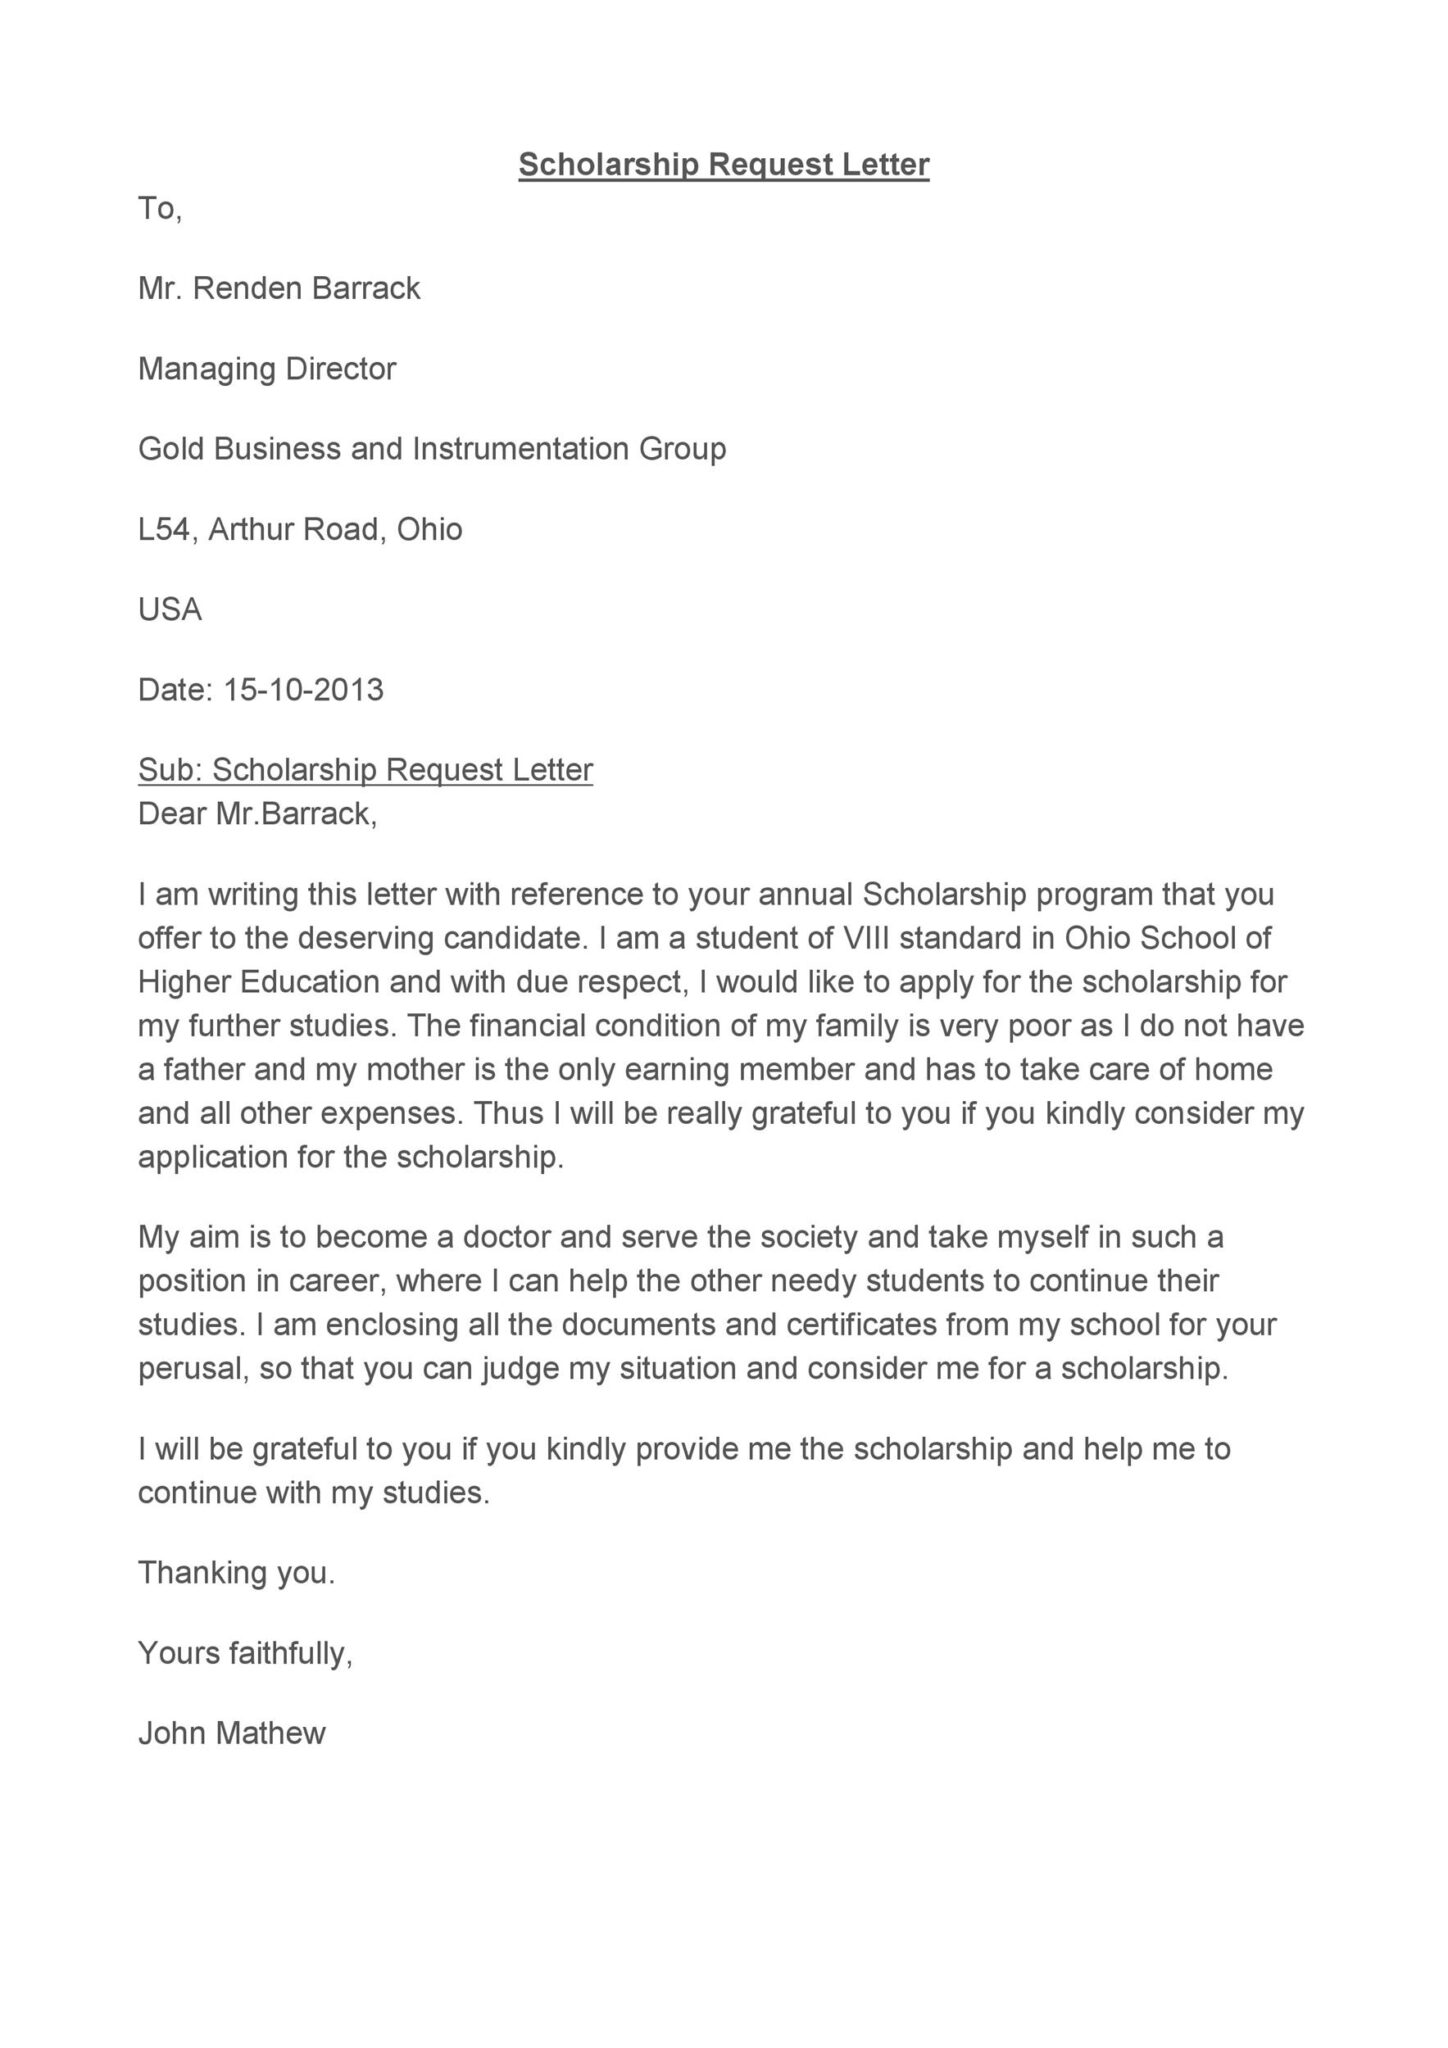 what is an example of application letter for scholarship request